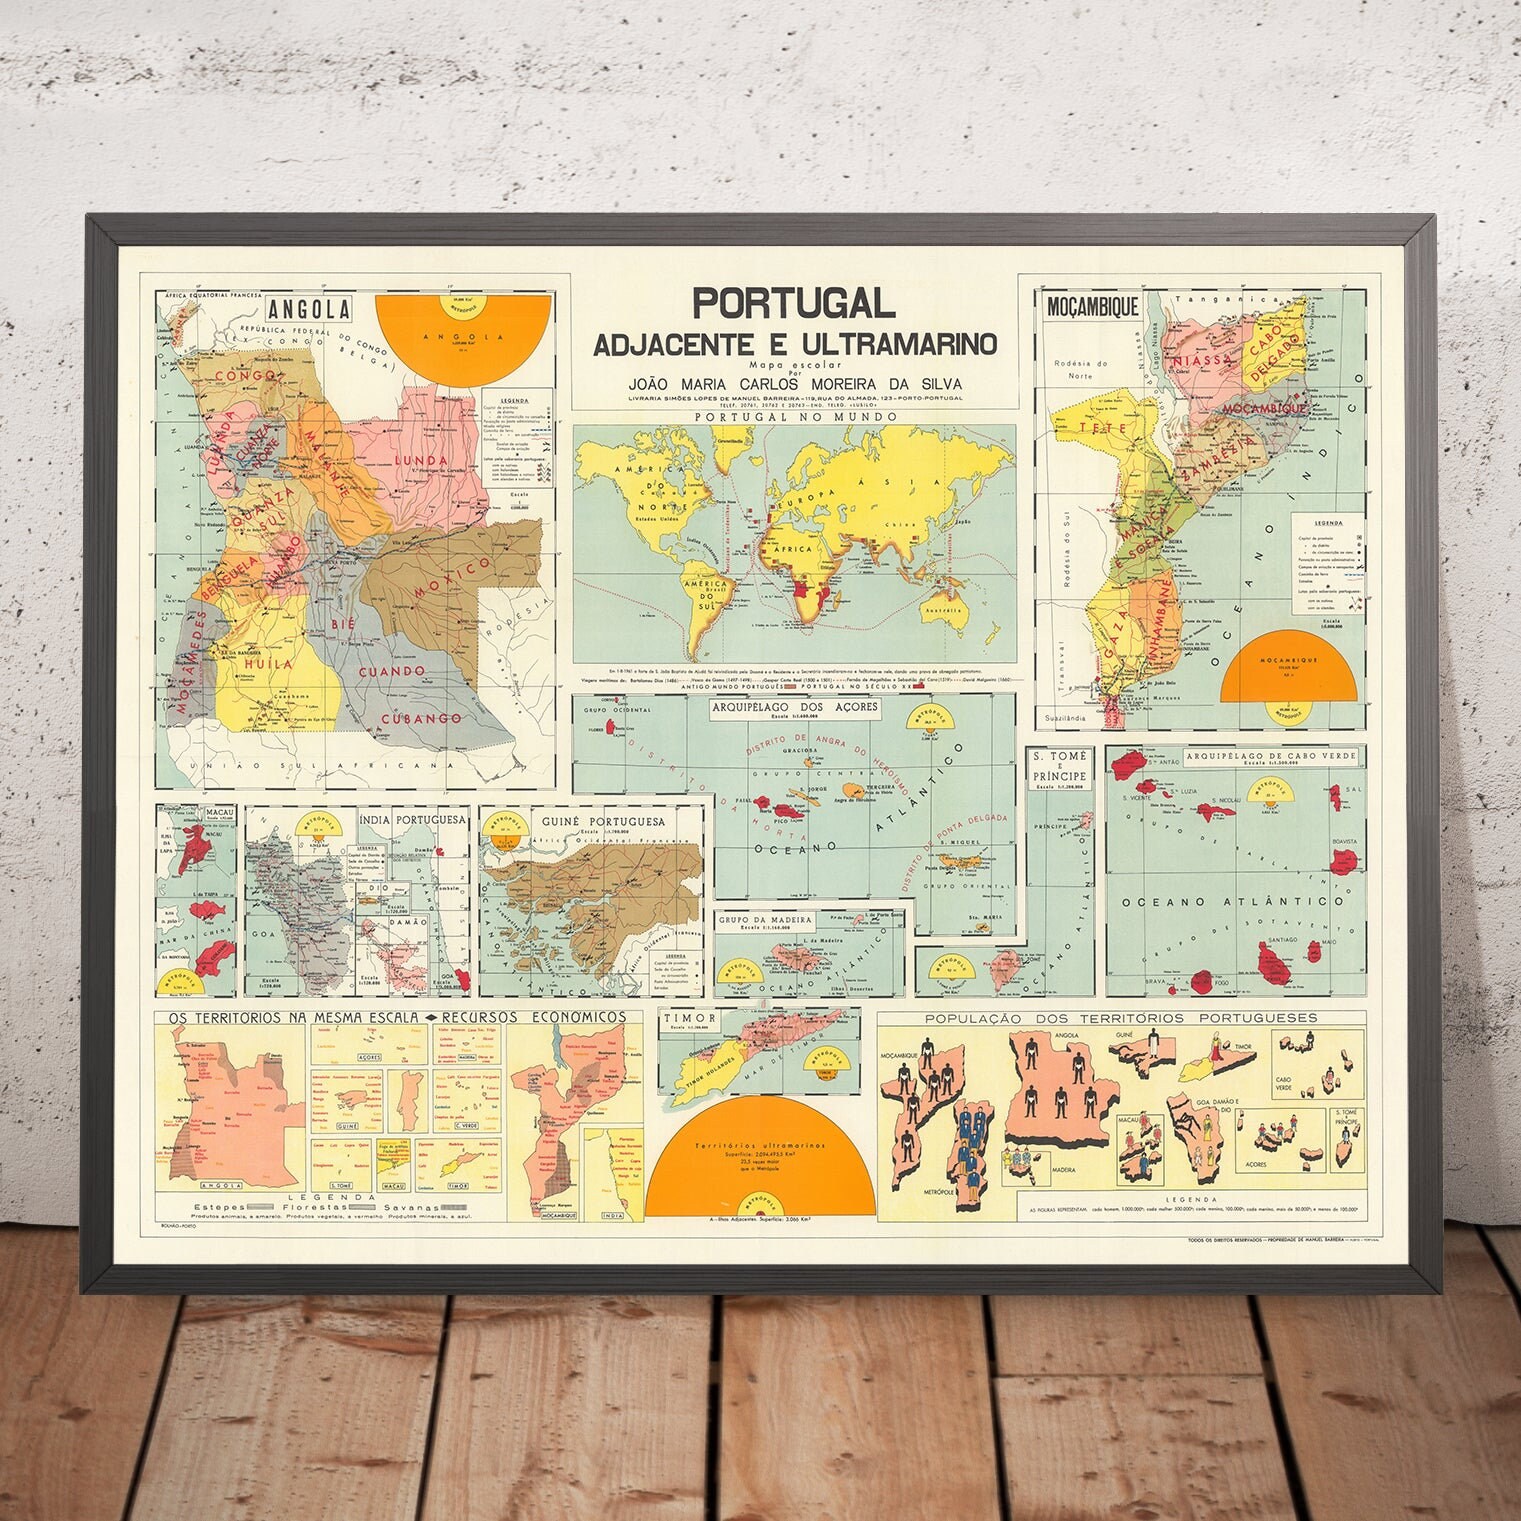 Portugal Map, Map of Portugal, Old World Map, Digital Old World Map,  Antique World Map, Vintage Map, Antique Map, Old Map 1927-30 -  Denmark